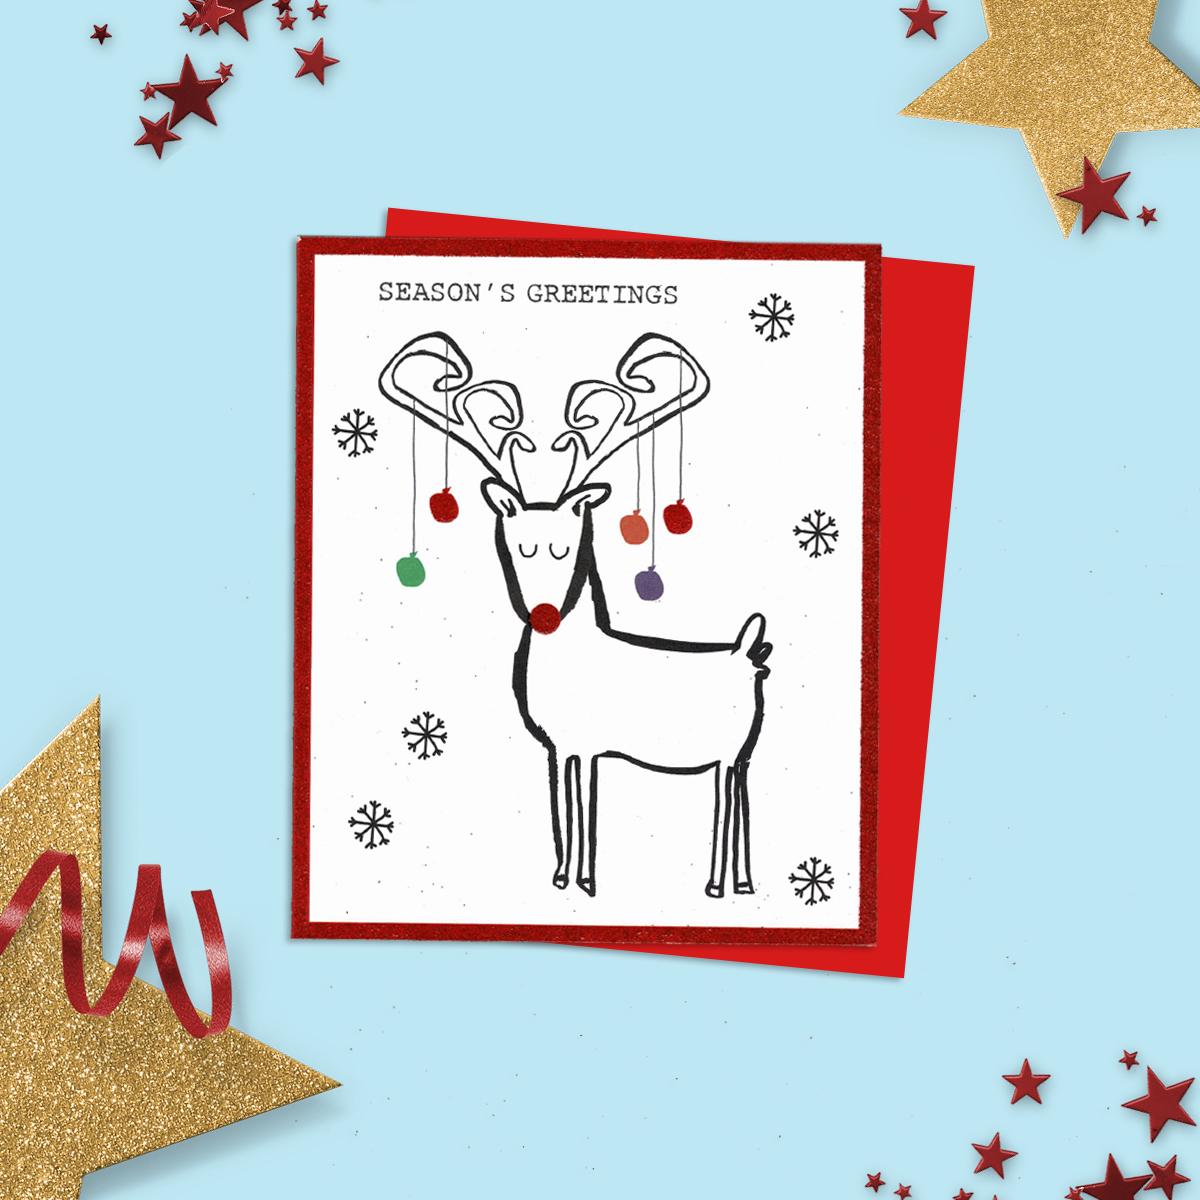 General Christmas Card Featuring A Doodled Reindeer With Christmas Lights On His Antlers! Added Glitter and Red Envelope To Complete